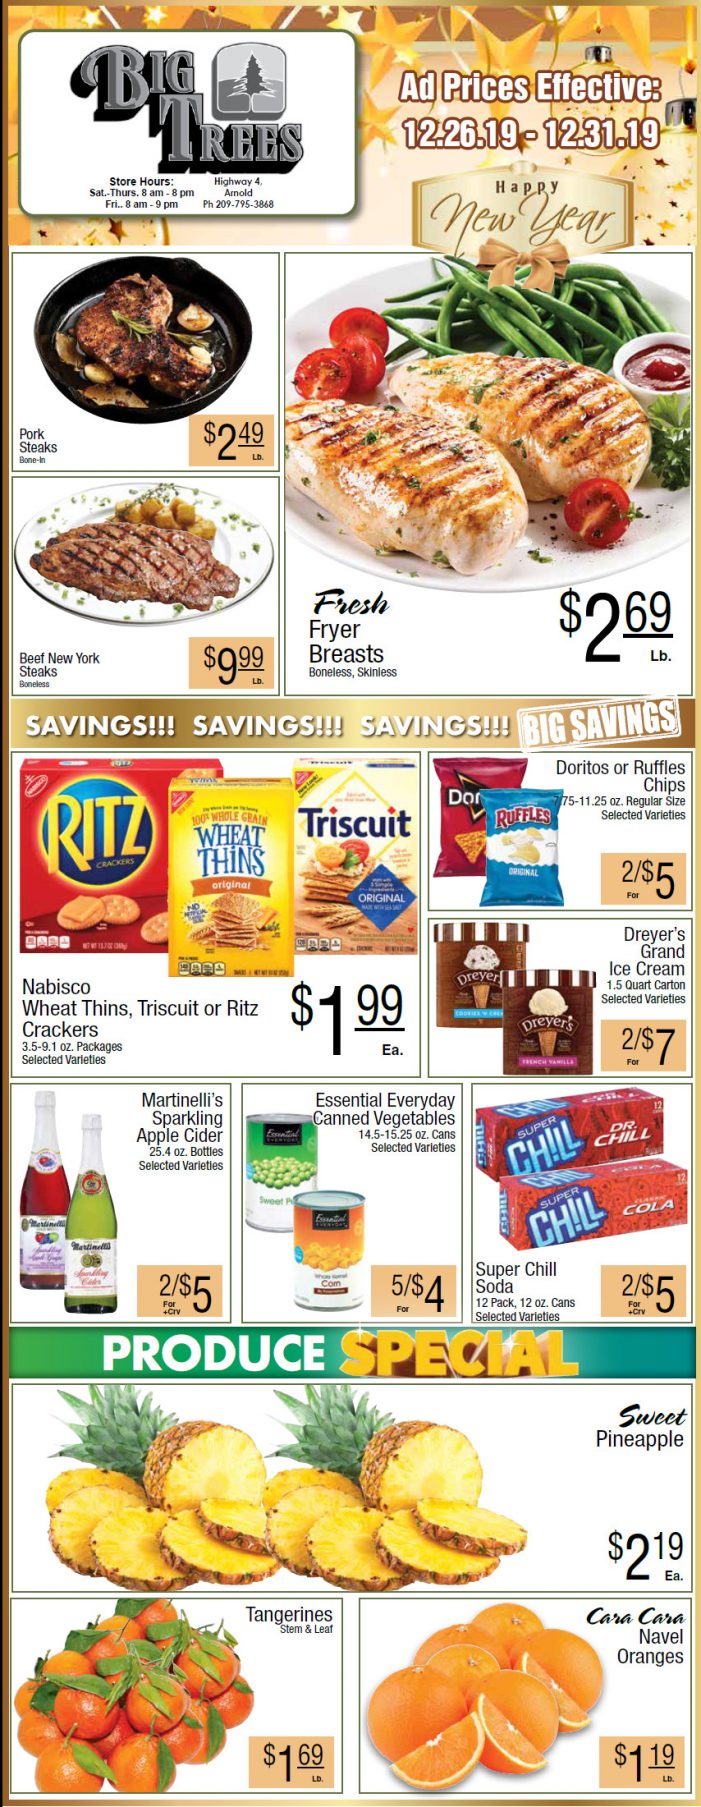 Big Trees Market Weekly Ad & Grocery Specials Through December 31st!